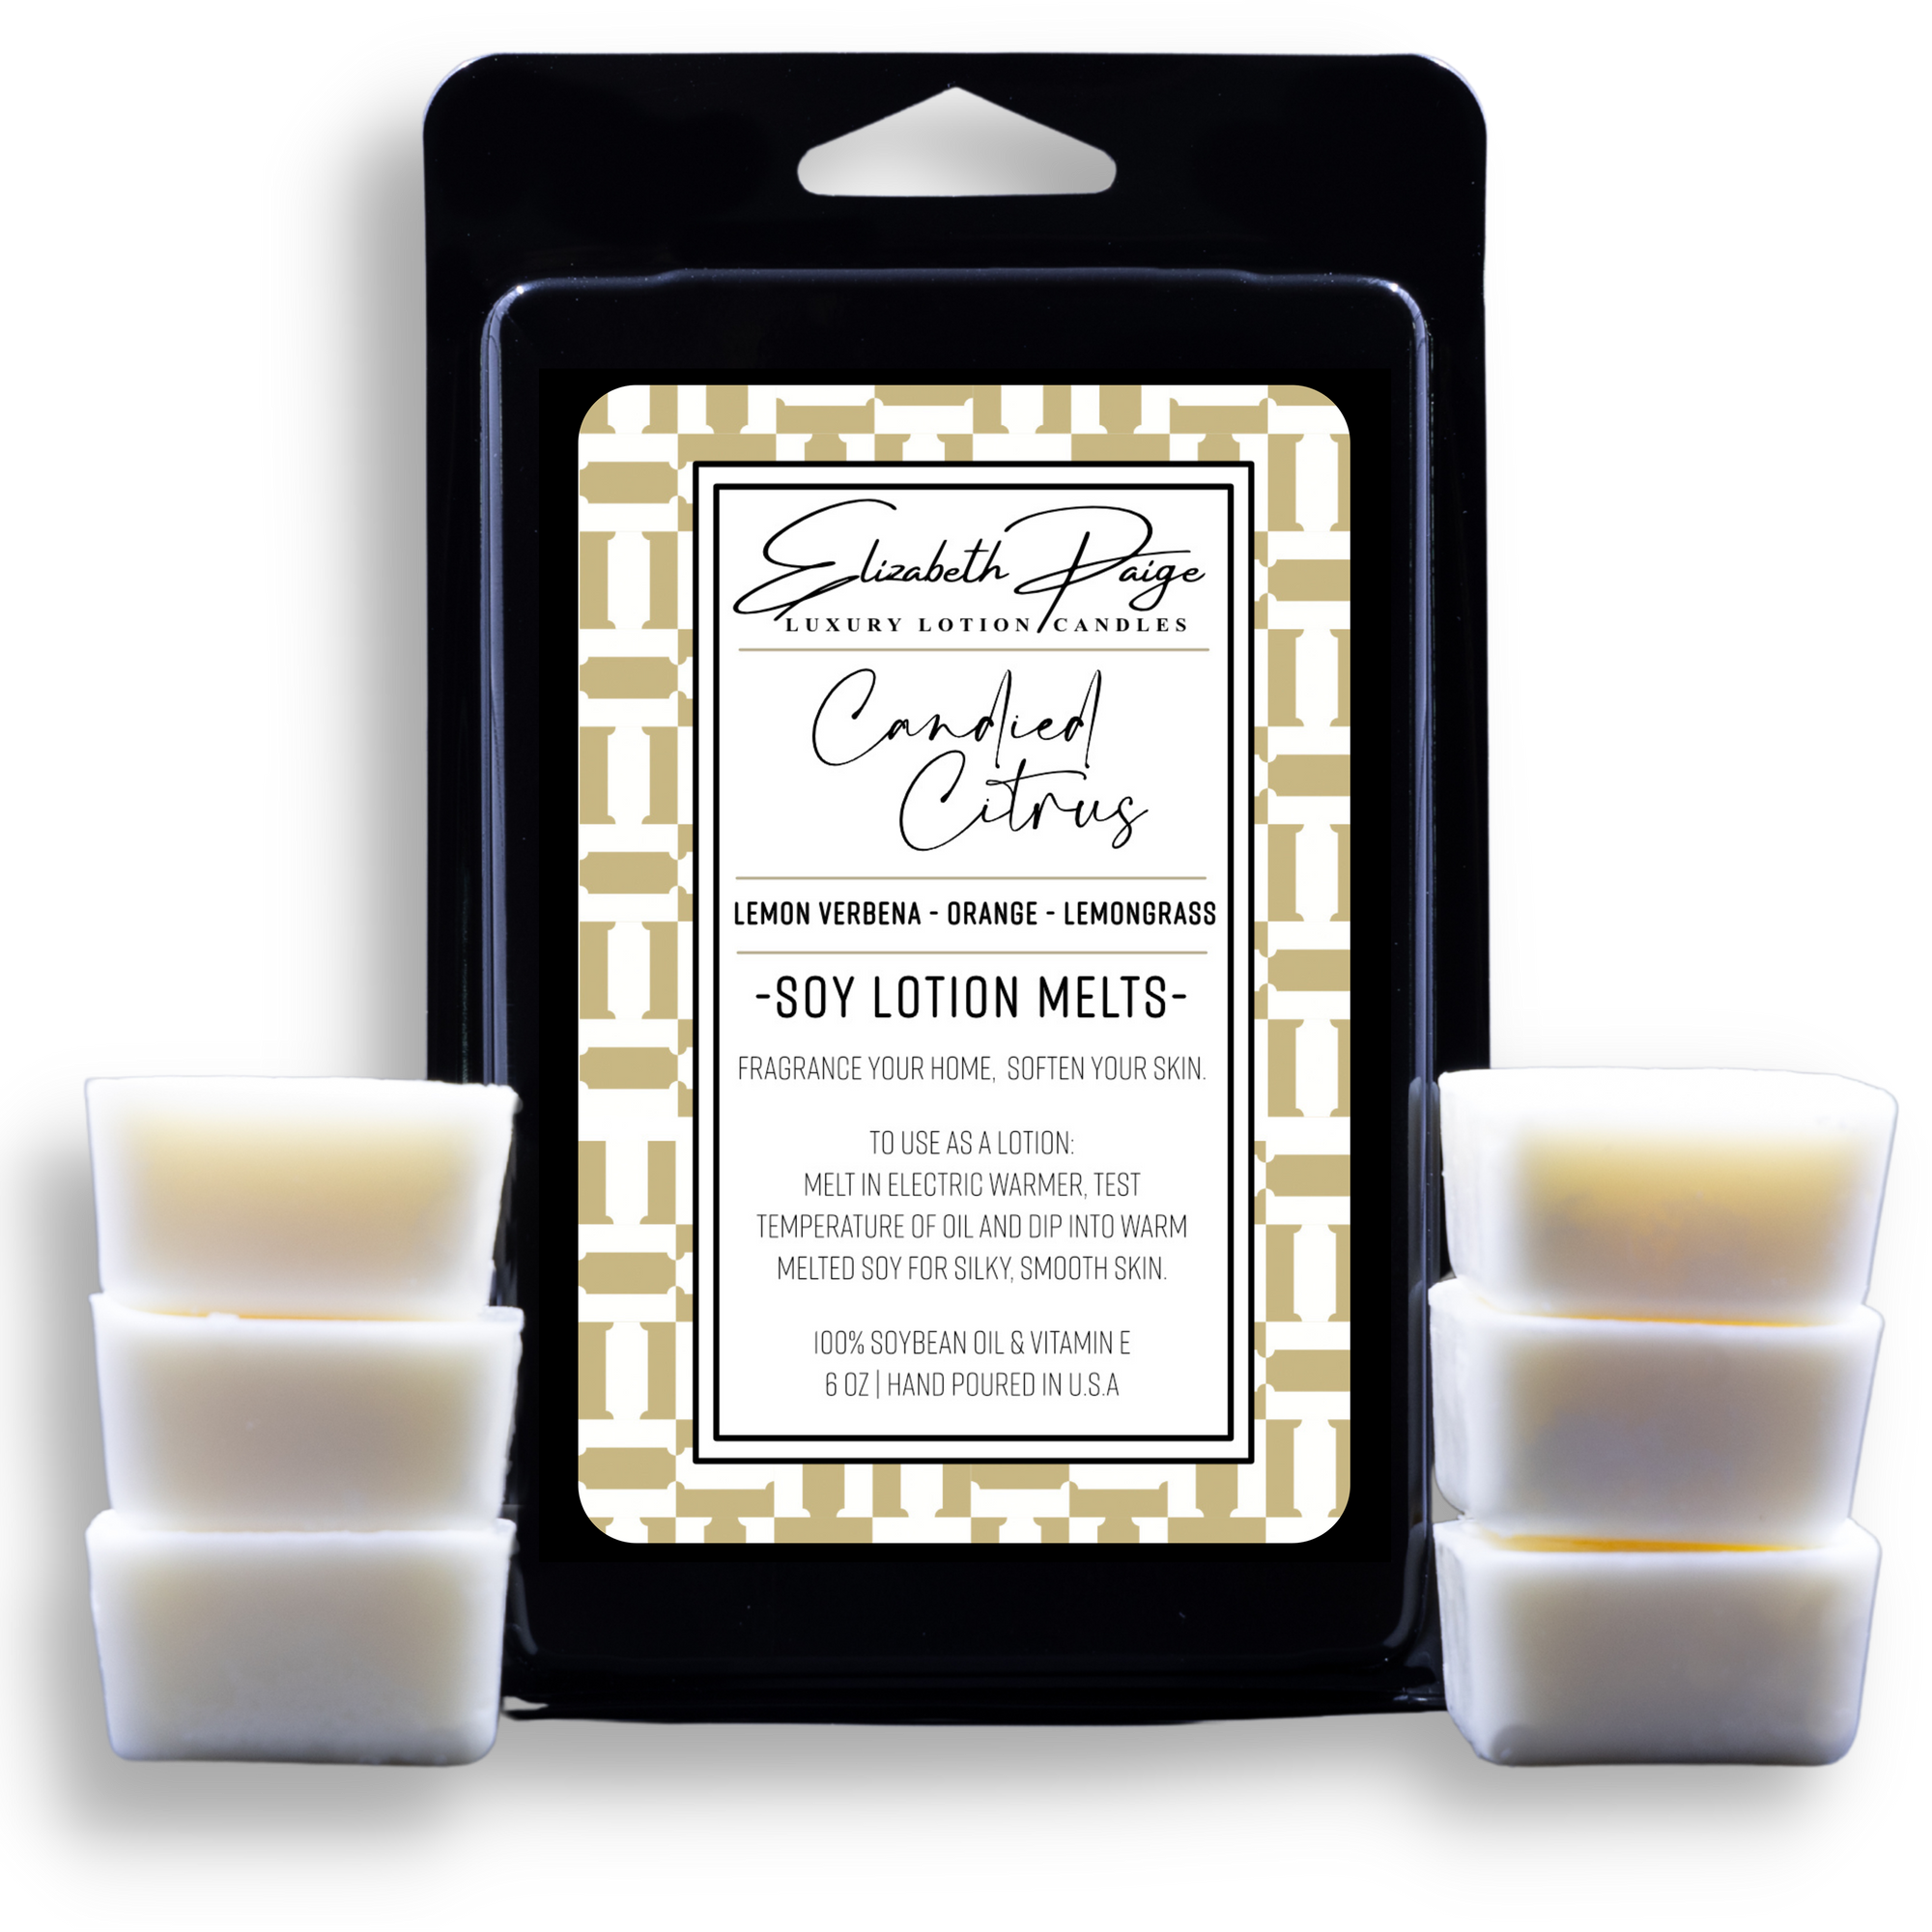 Candied Citrus Soy Lotion Melts